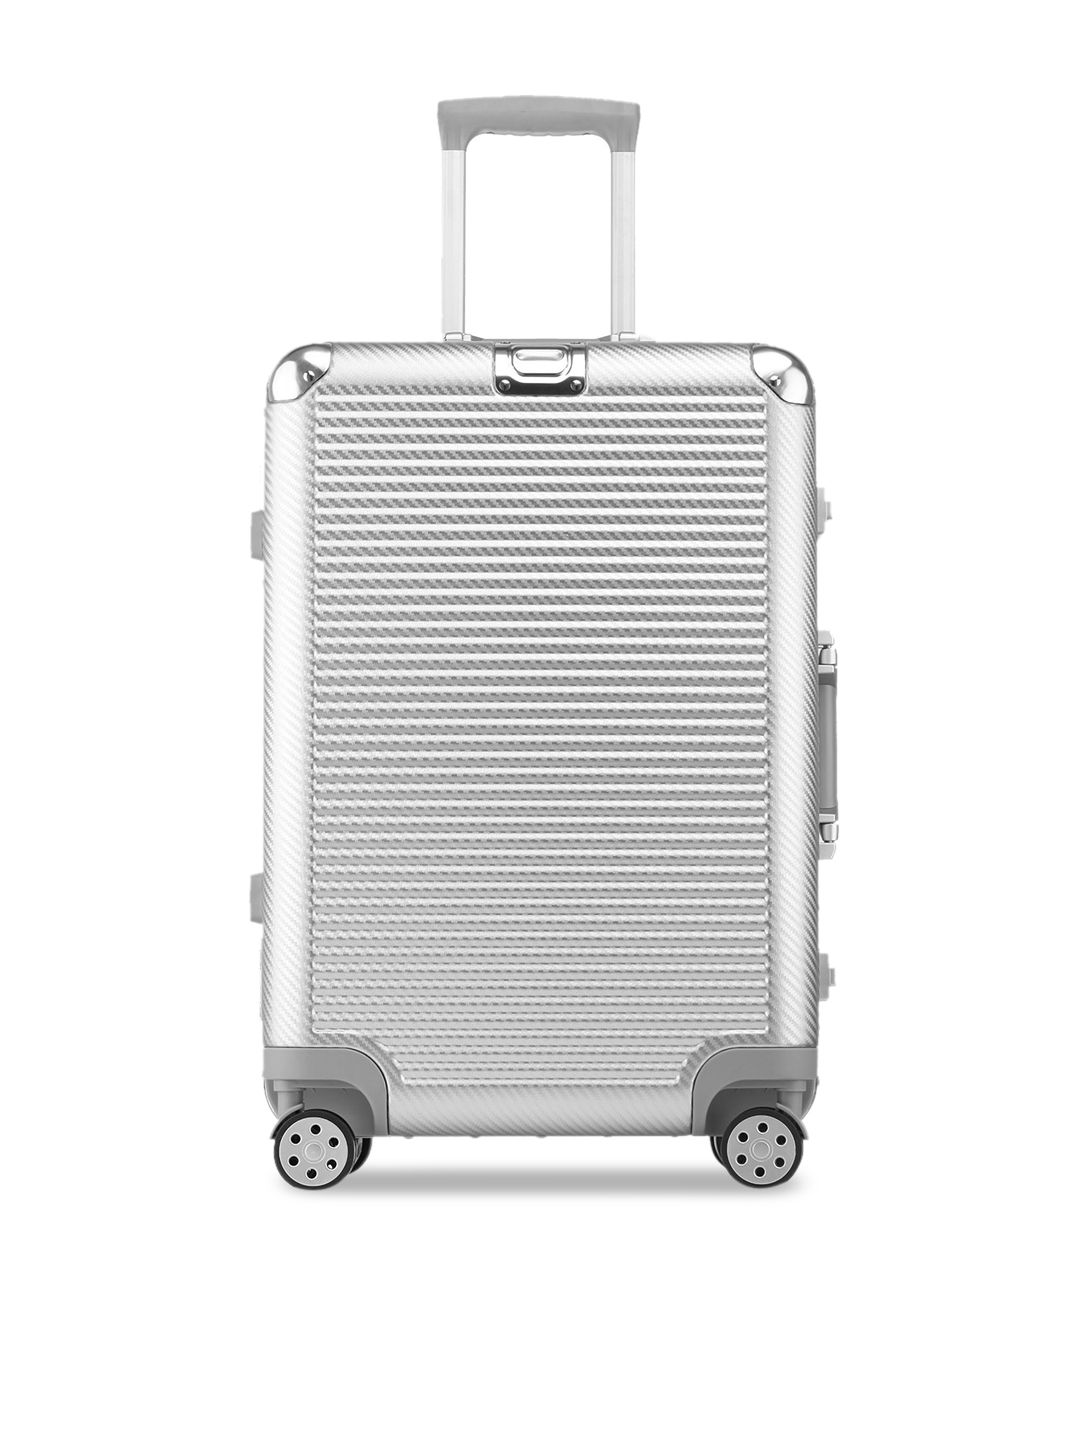 ELOPPE Silver-Toned Textured Hard-Sided Medium Trolley Suitcase Price in India